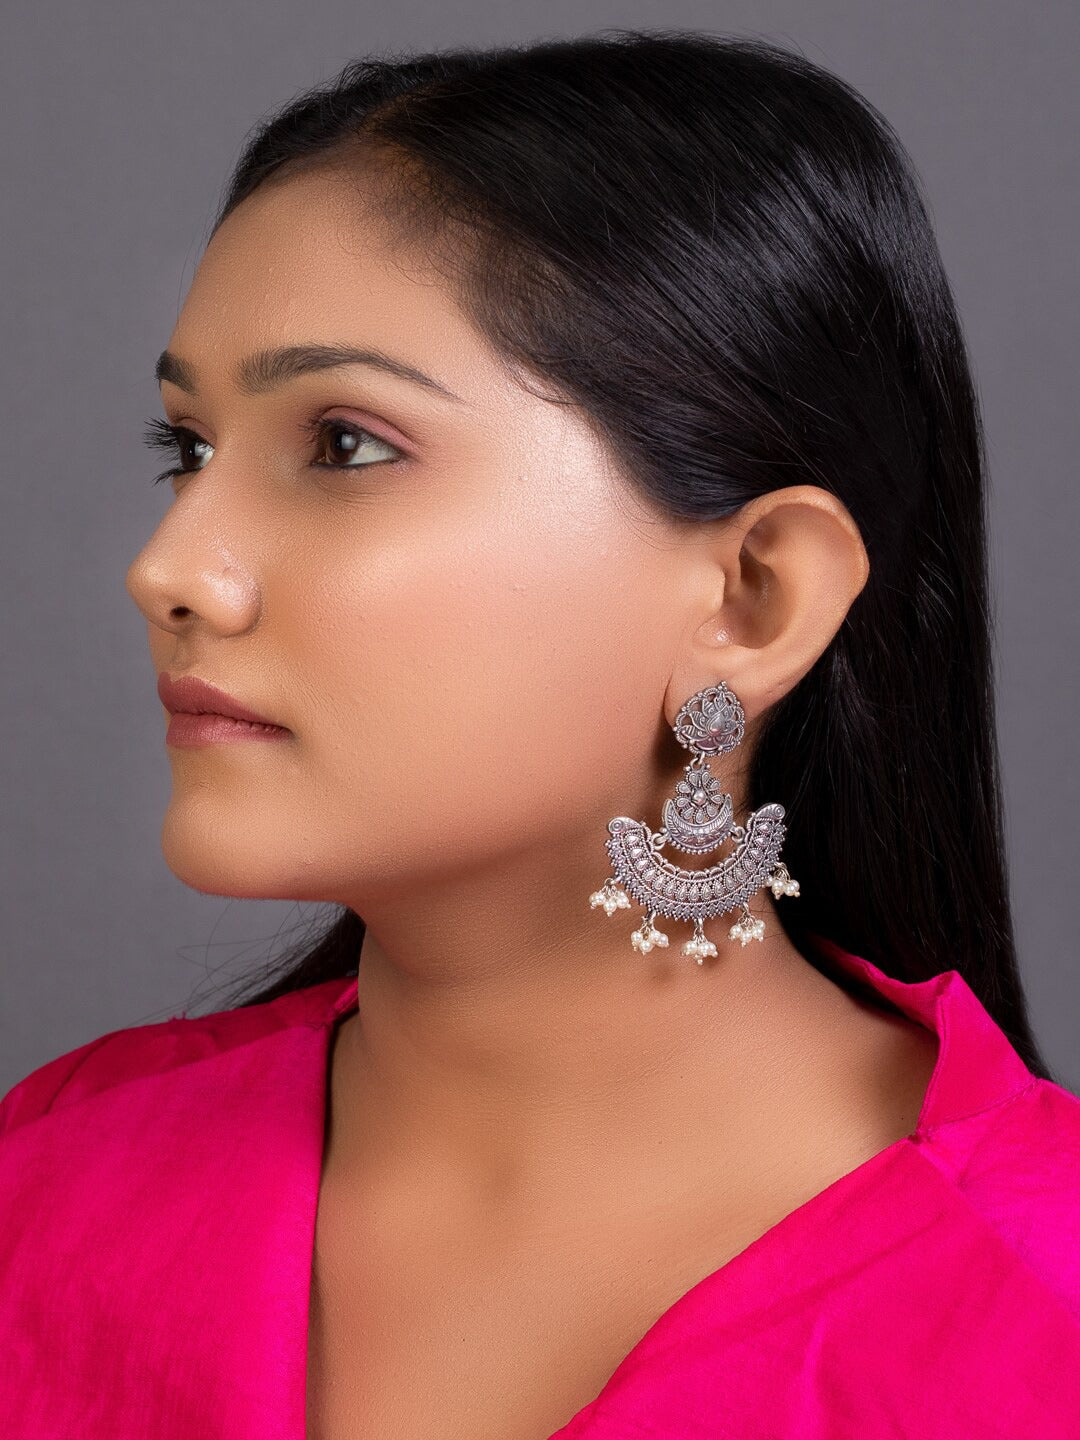 Women's Silver-Plated Crescent Shaped Chandbalis Earrings - Morkanth